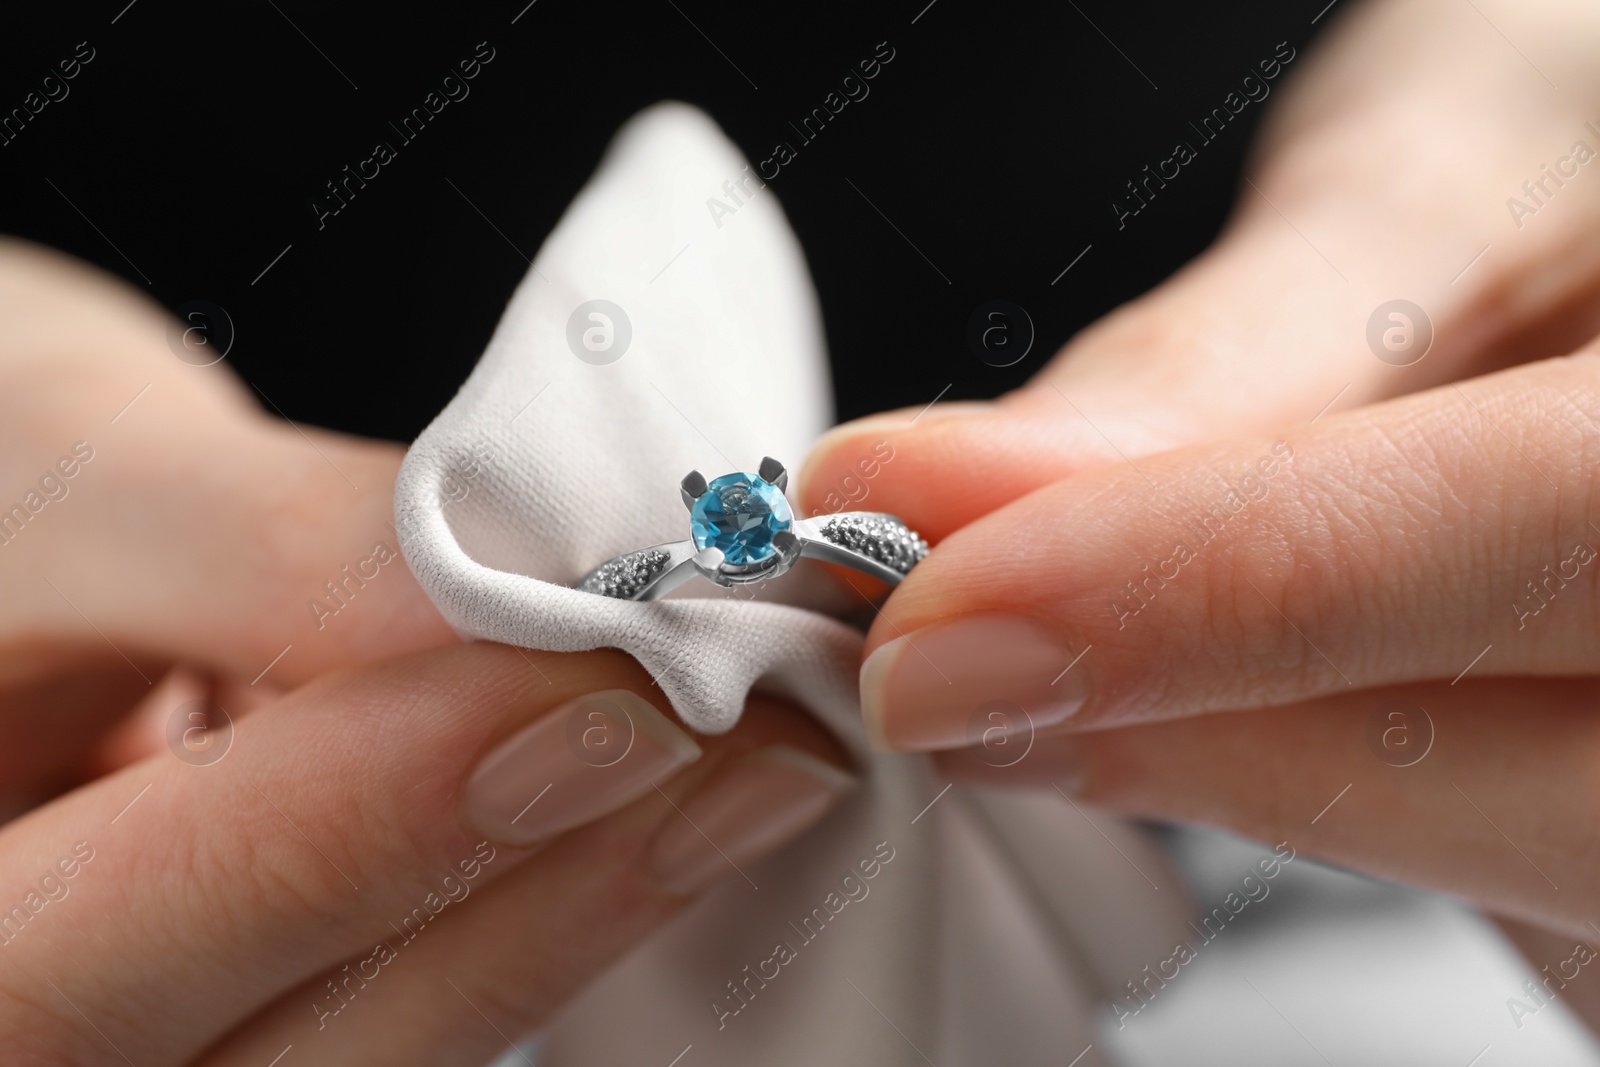 Photo of Jeweler cleaning topaz ring with microfiber cloth, closeup